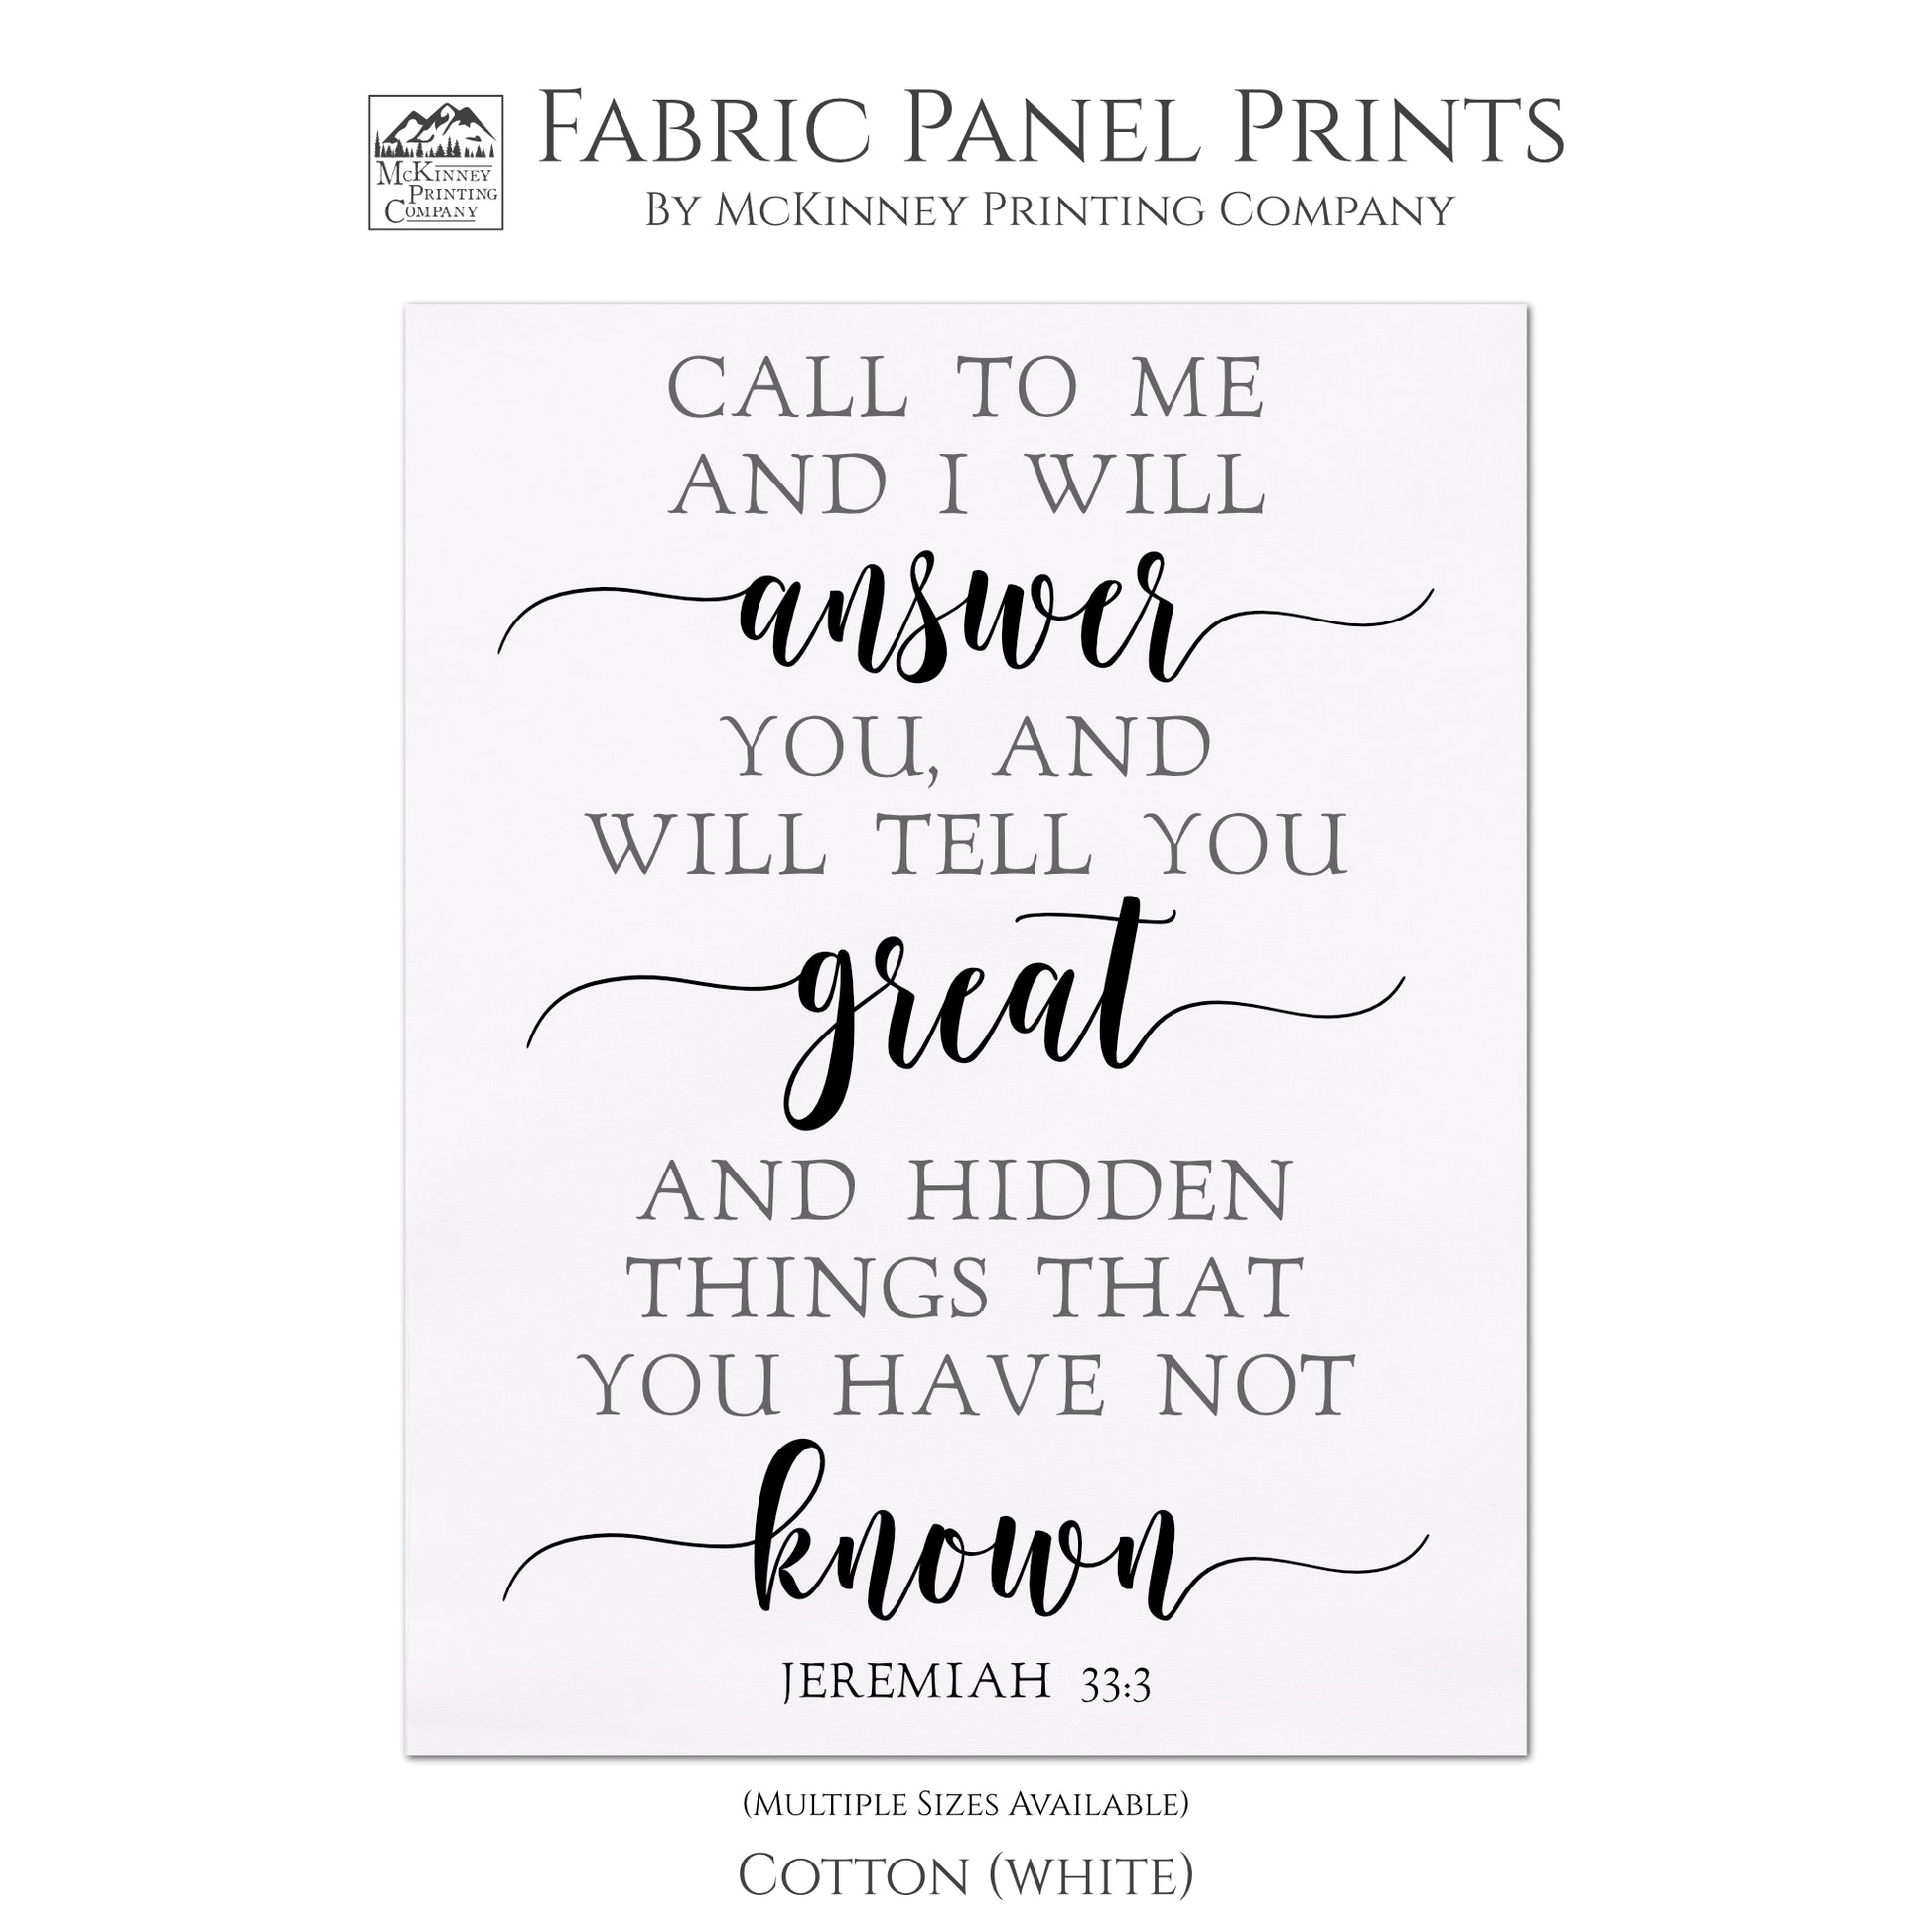 Call to me and I will answer you, and will tell you great and hidden things that you have not known. - Jeremiah 33:3, Quilt Block, Fabric Panel Print, Scripture Fabric - Cotton, White